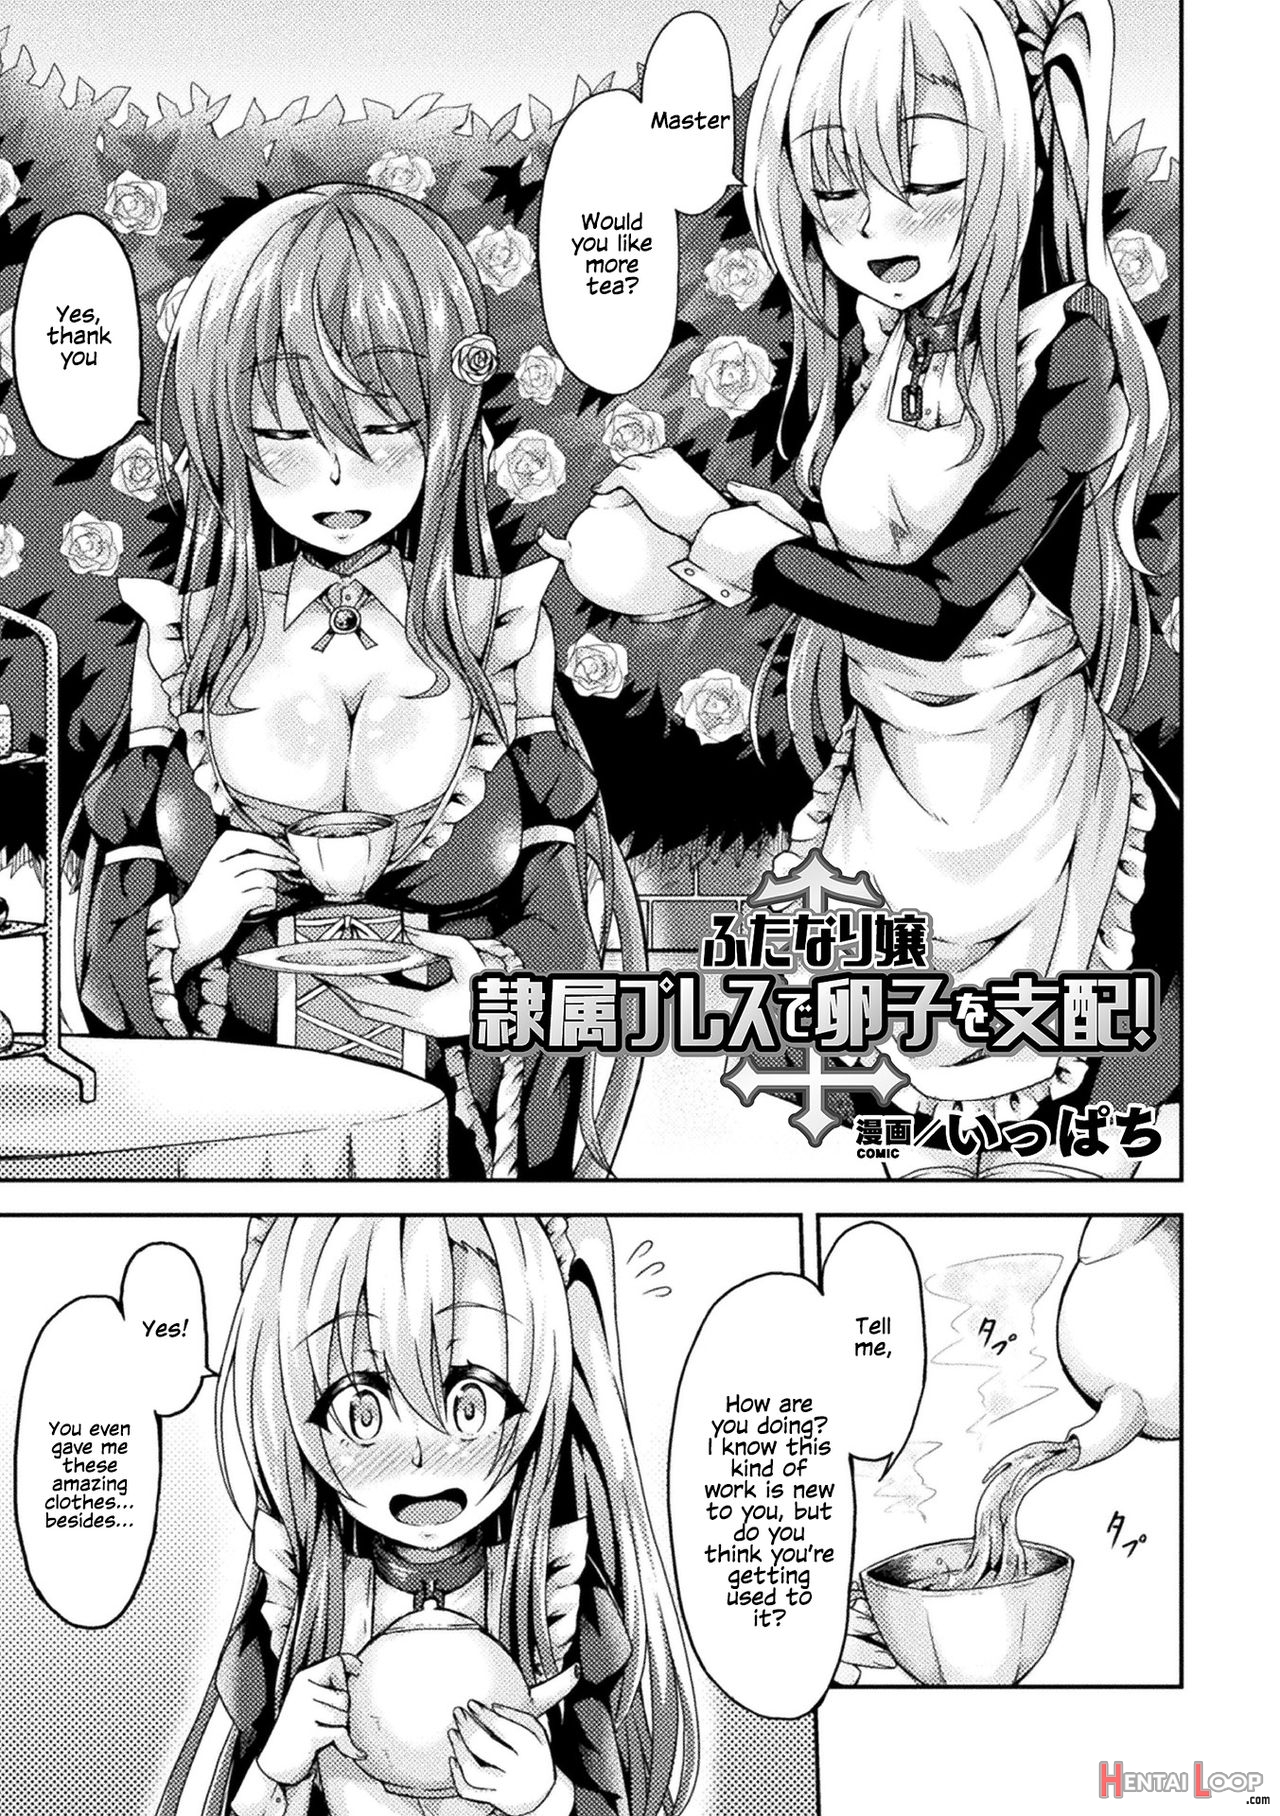 Futanari Girls Forcefully Impregnating Others With A Mating Press! Vol. 1 page 61